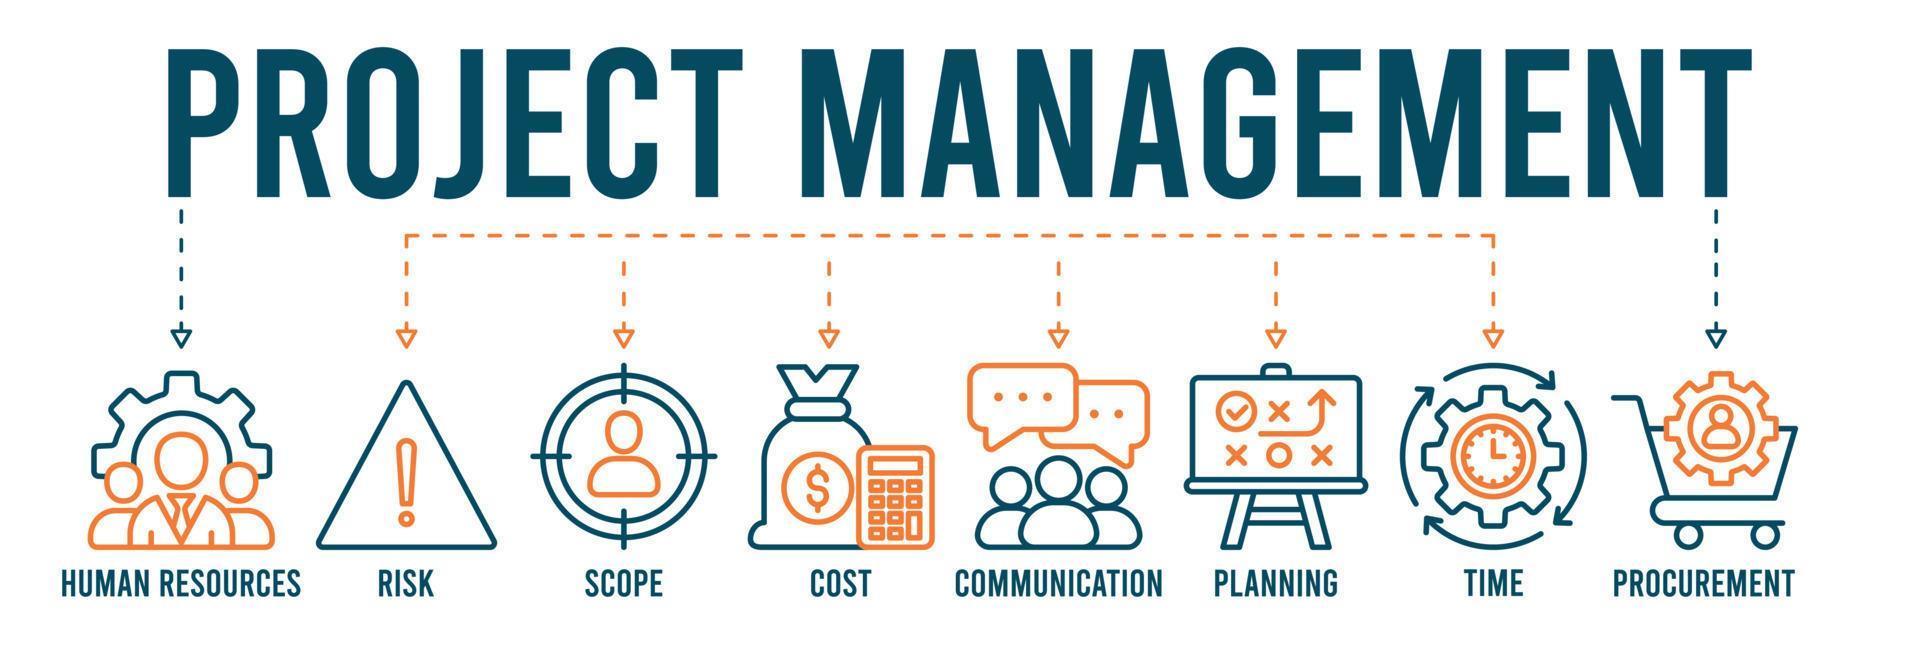 Project management banner web icon vector illustration concept with icon of human resources, risk, scope, cost, communication, planning, time and procurement